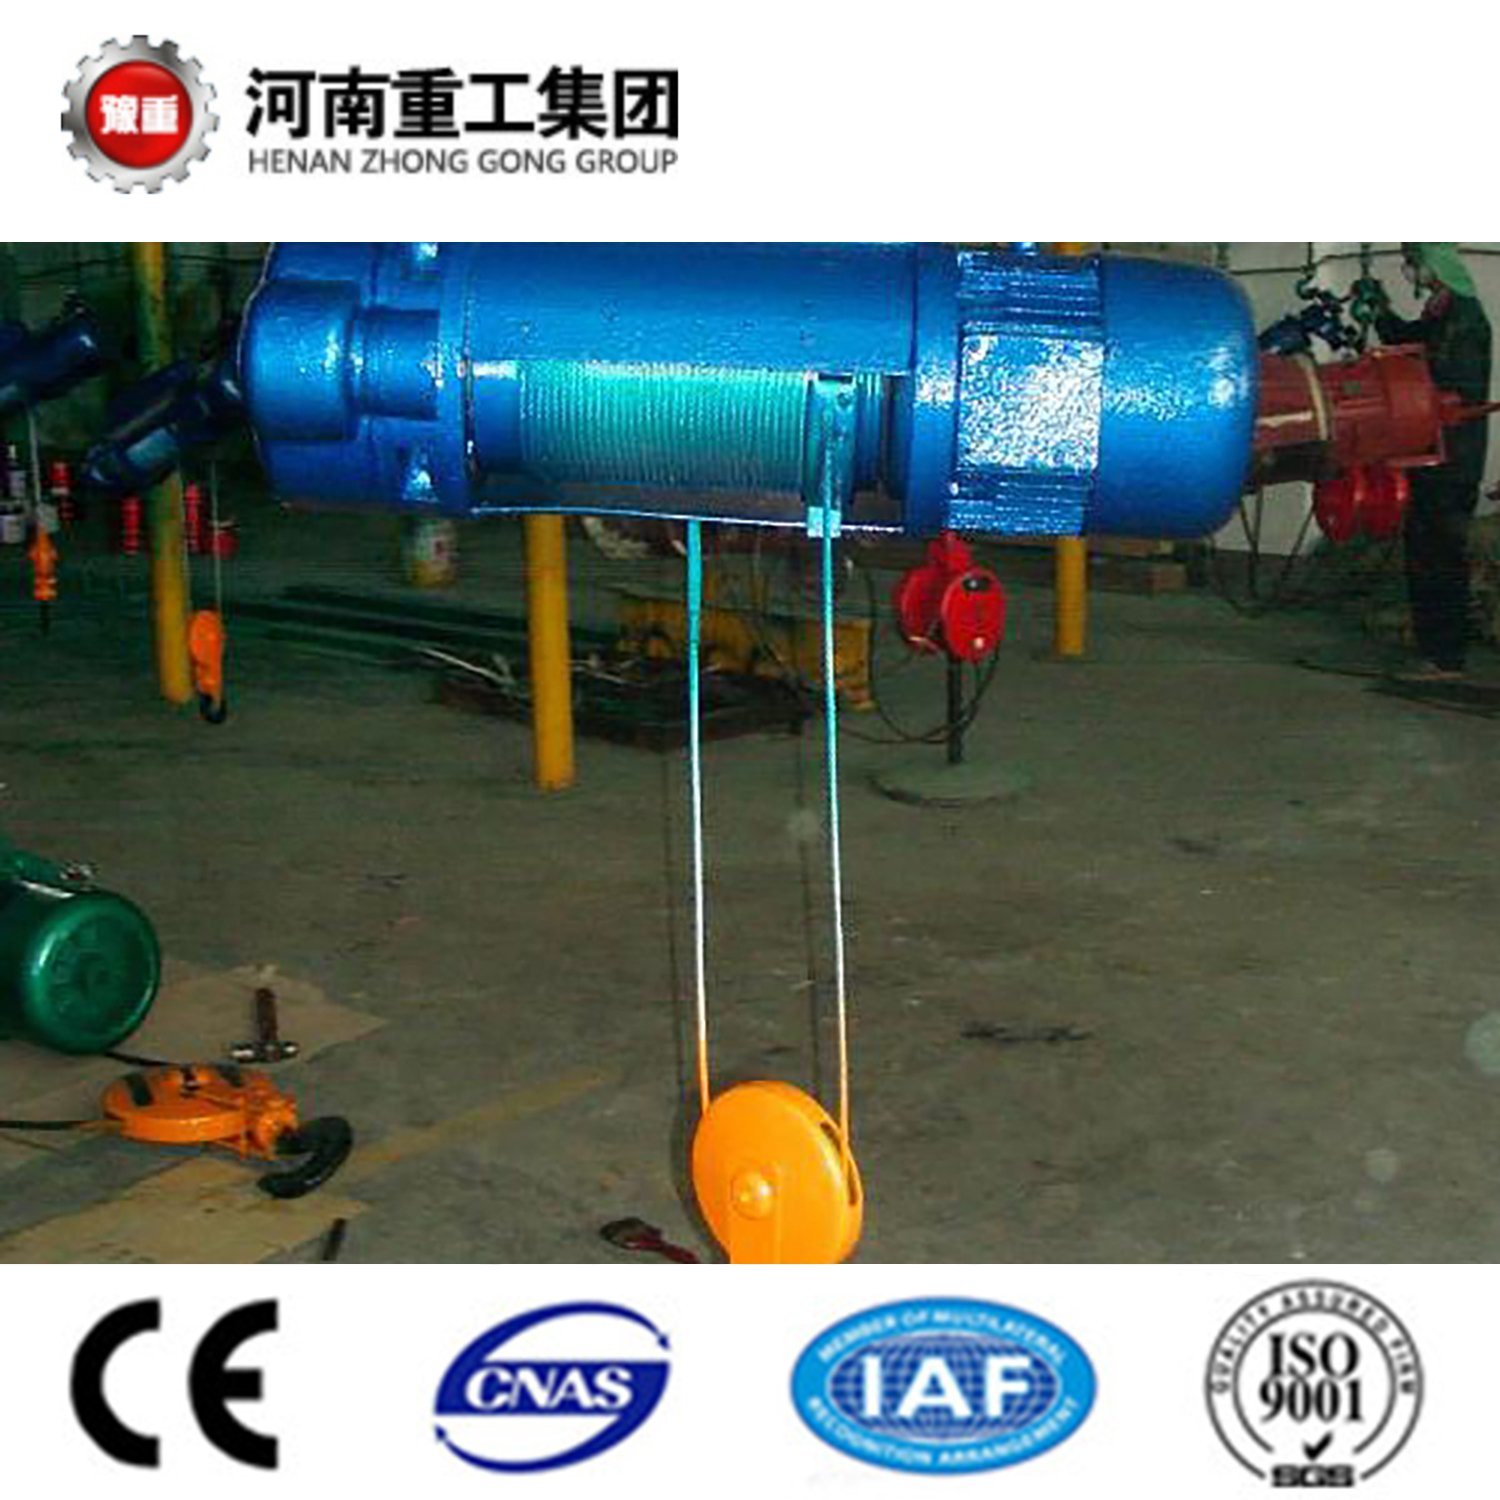 3-30mLifting Height 0.25t, 0.5t, 1t, 2t, 3t, 5t, 10t, 16t, 20t Electric Wire Rope Hoist